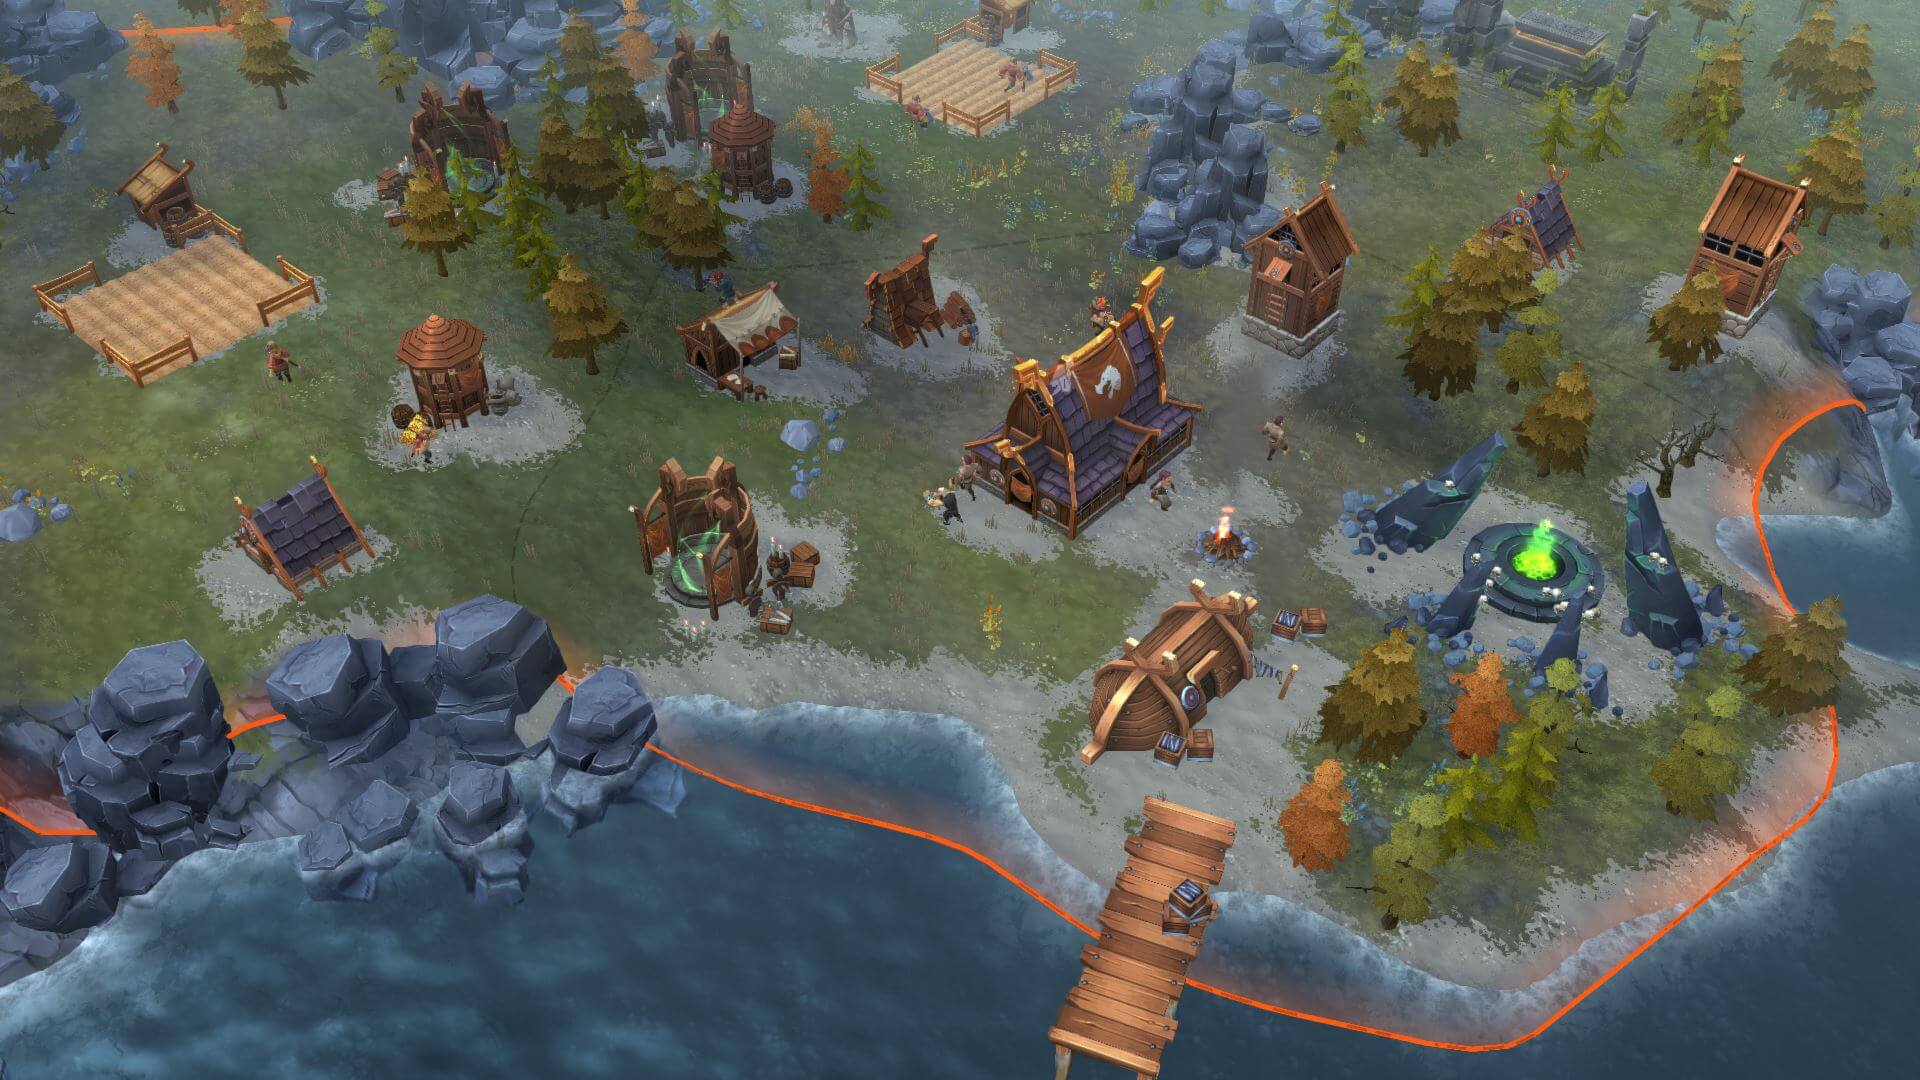 Review: A Superb RTS With A Hearty Of